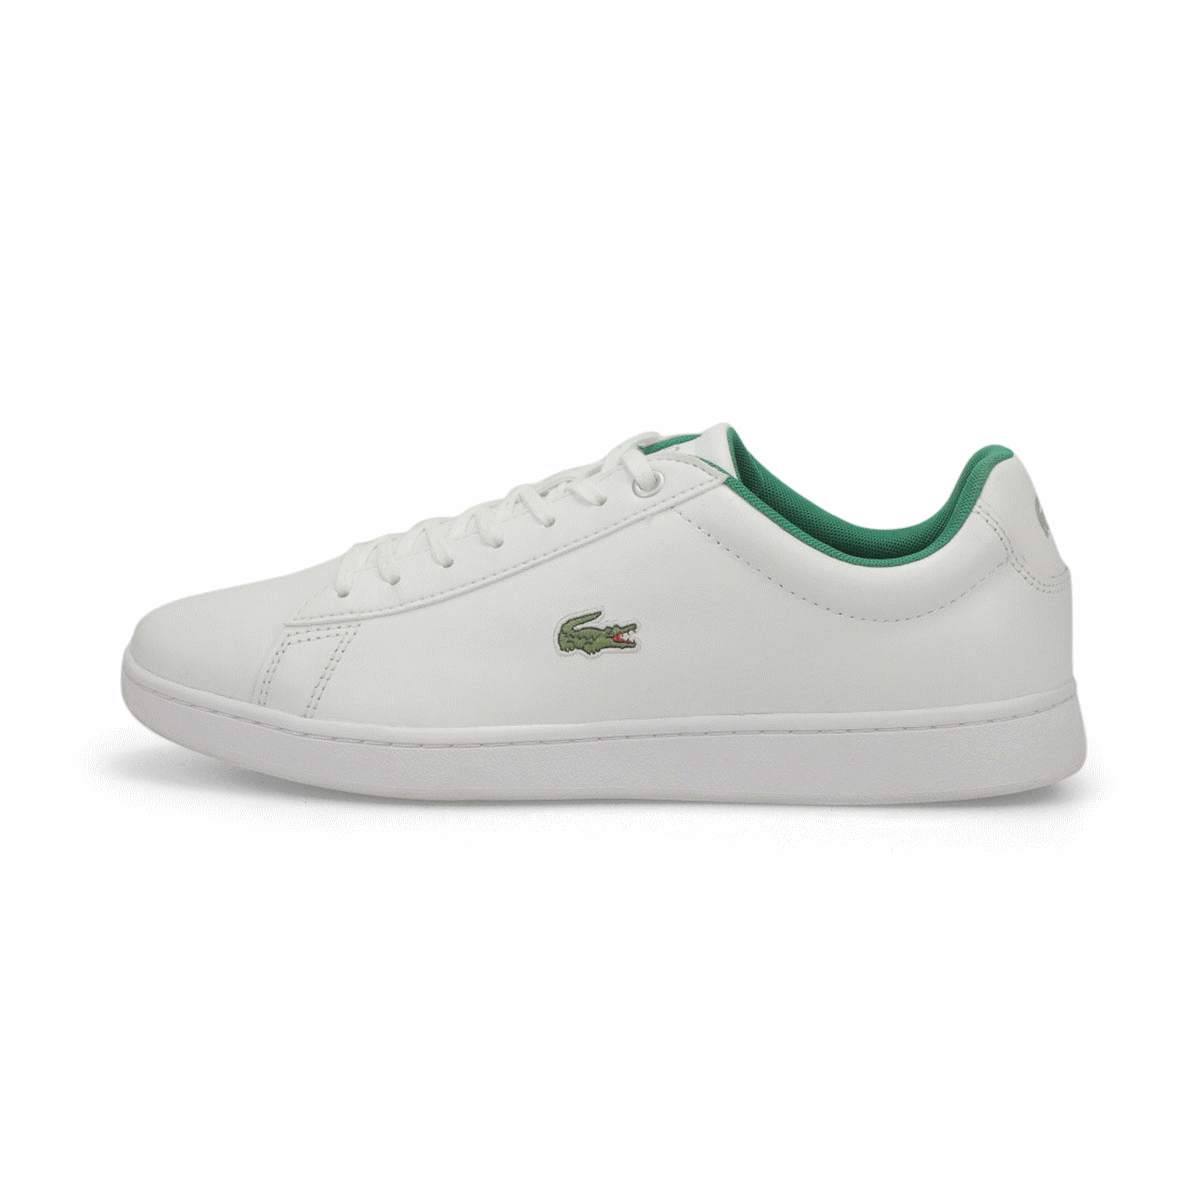 Lacoste Hydez 119 1P SMA Men's Leather Sneakers Grey/White Size 10 ...